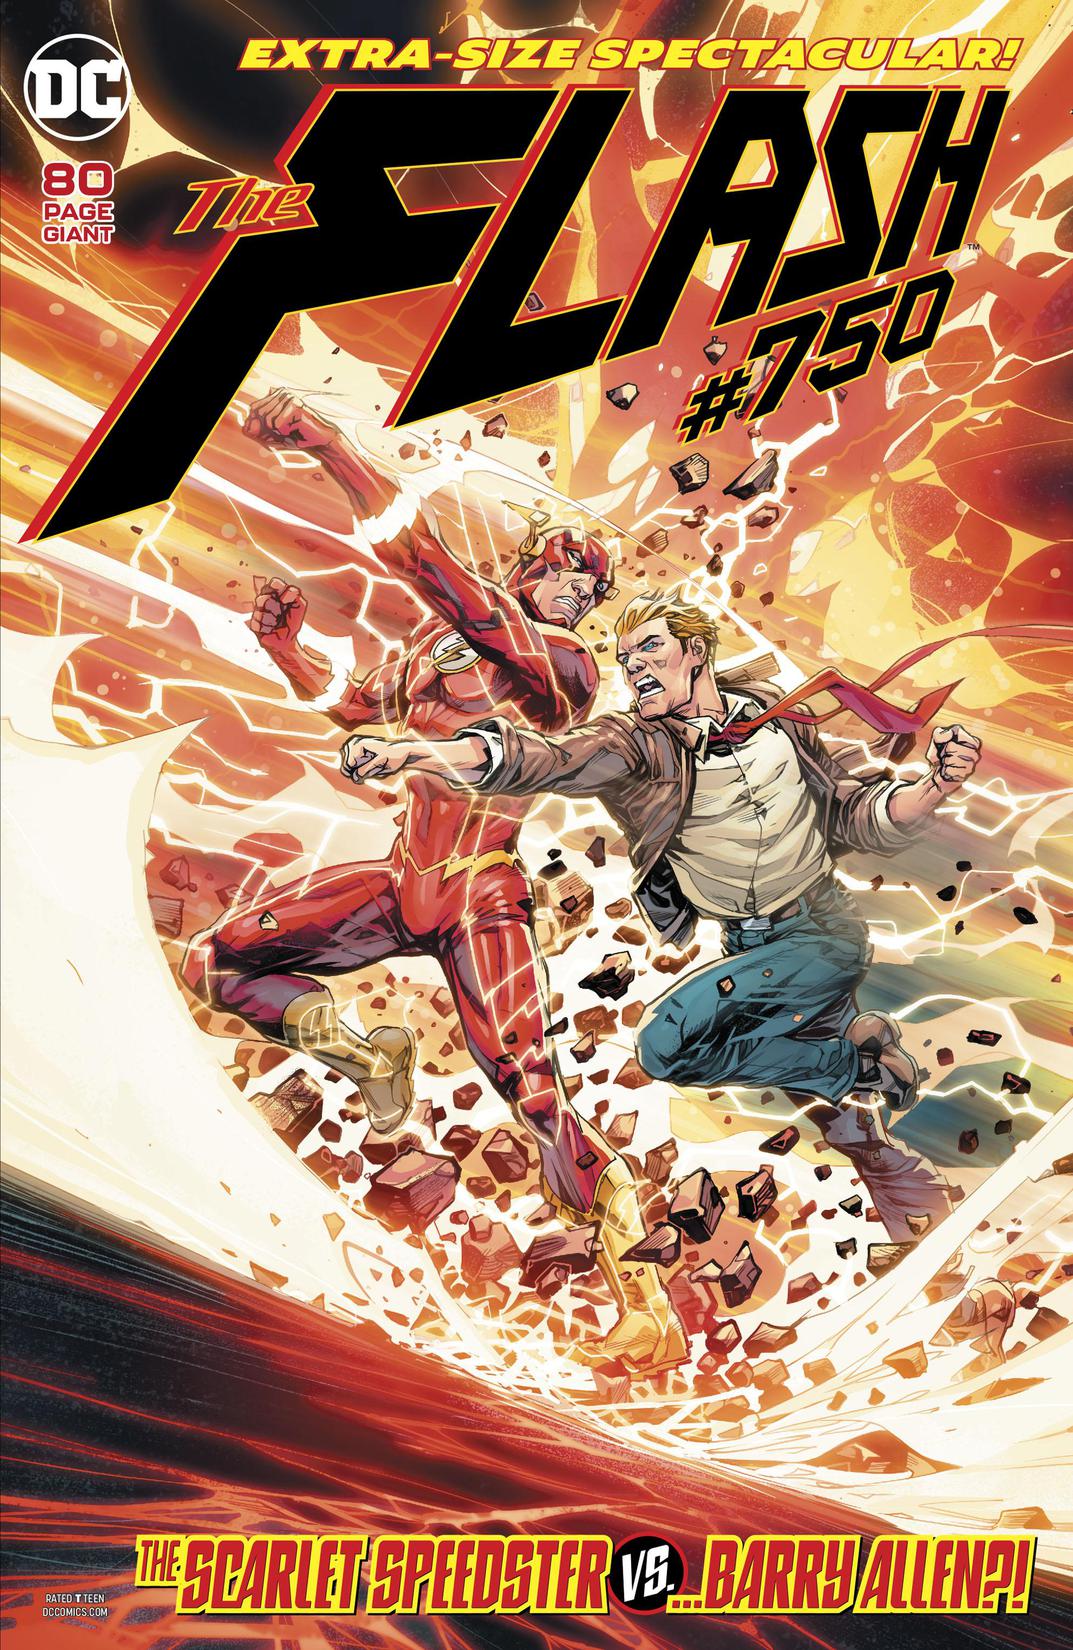 The Flash (2016-) #750 preview images